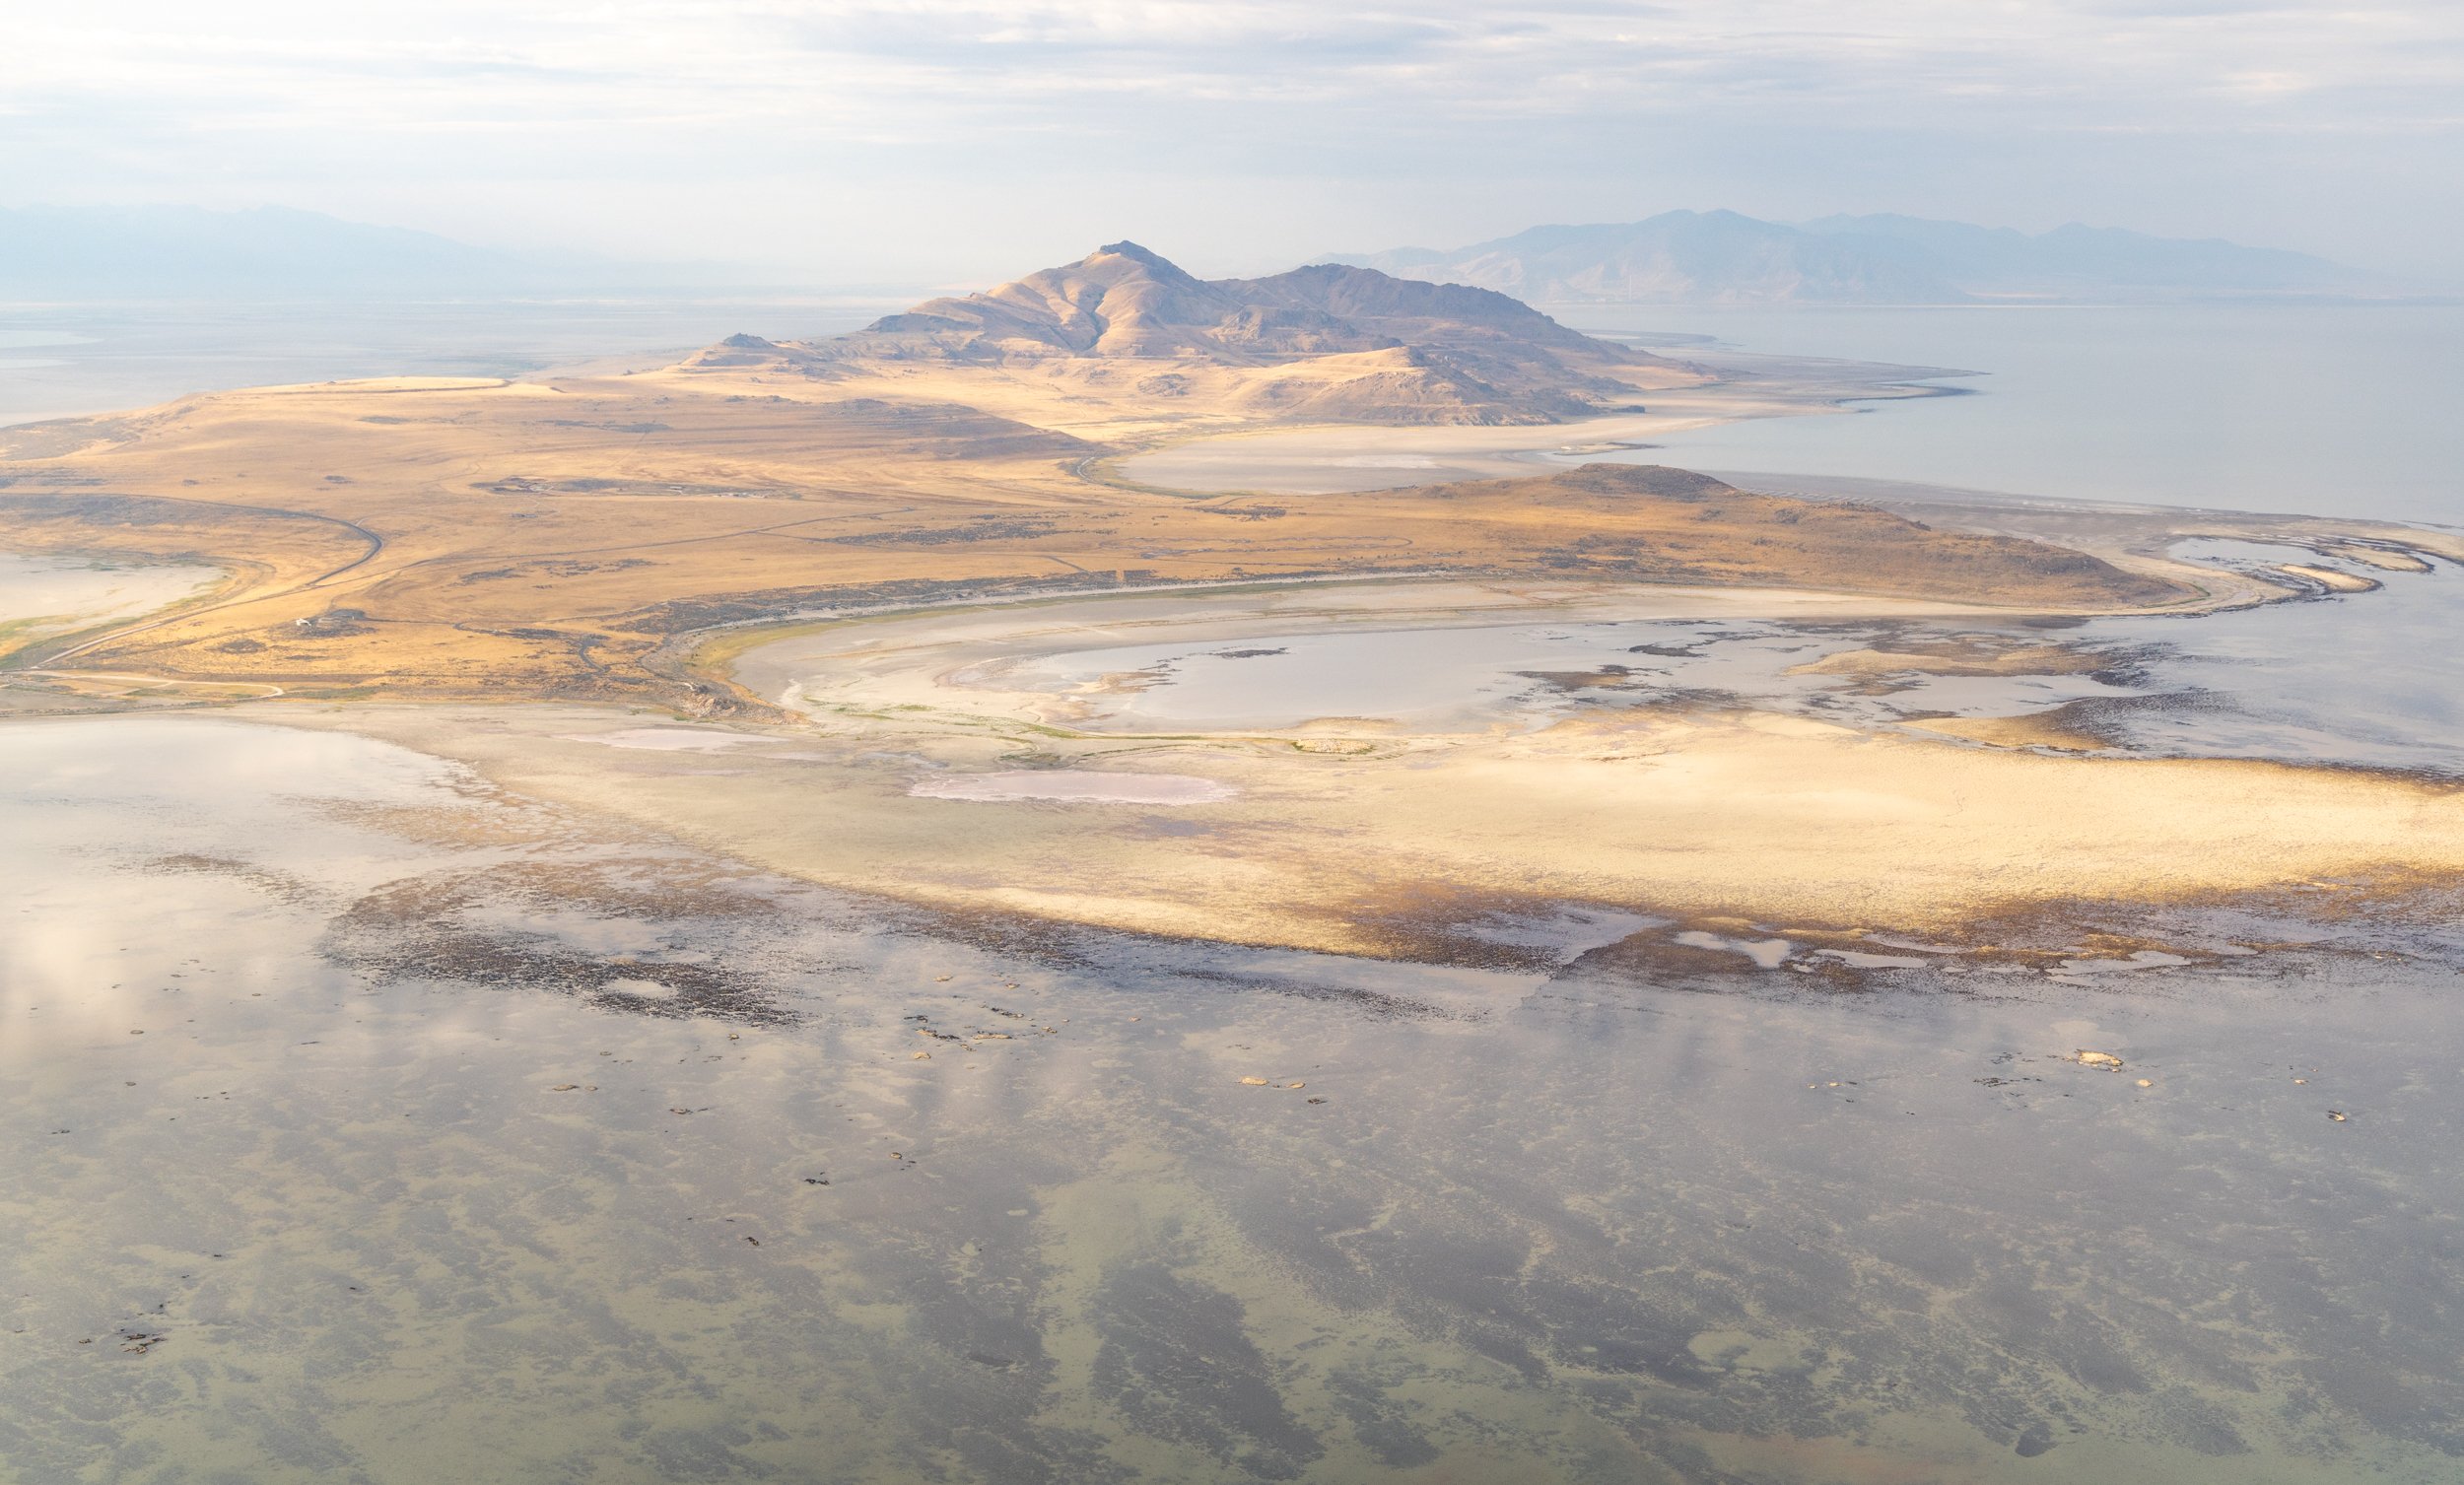  Aerial view of Antelope Island from the North.  Dry and bleached microbialites can be seen in front of the island, and submerged microbialites can be seen in shallow water in the foreground.  